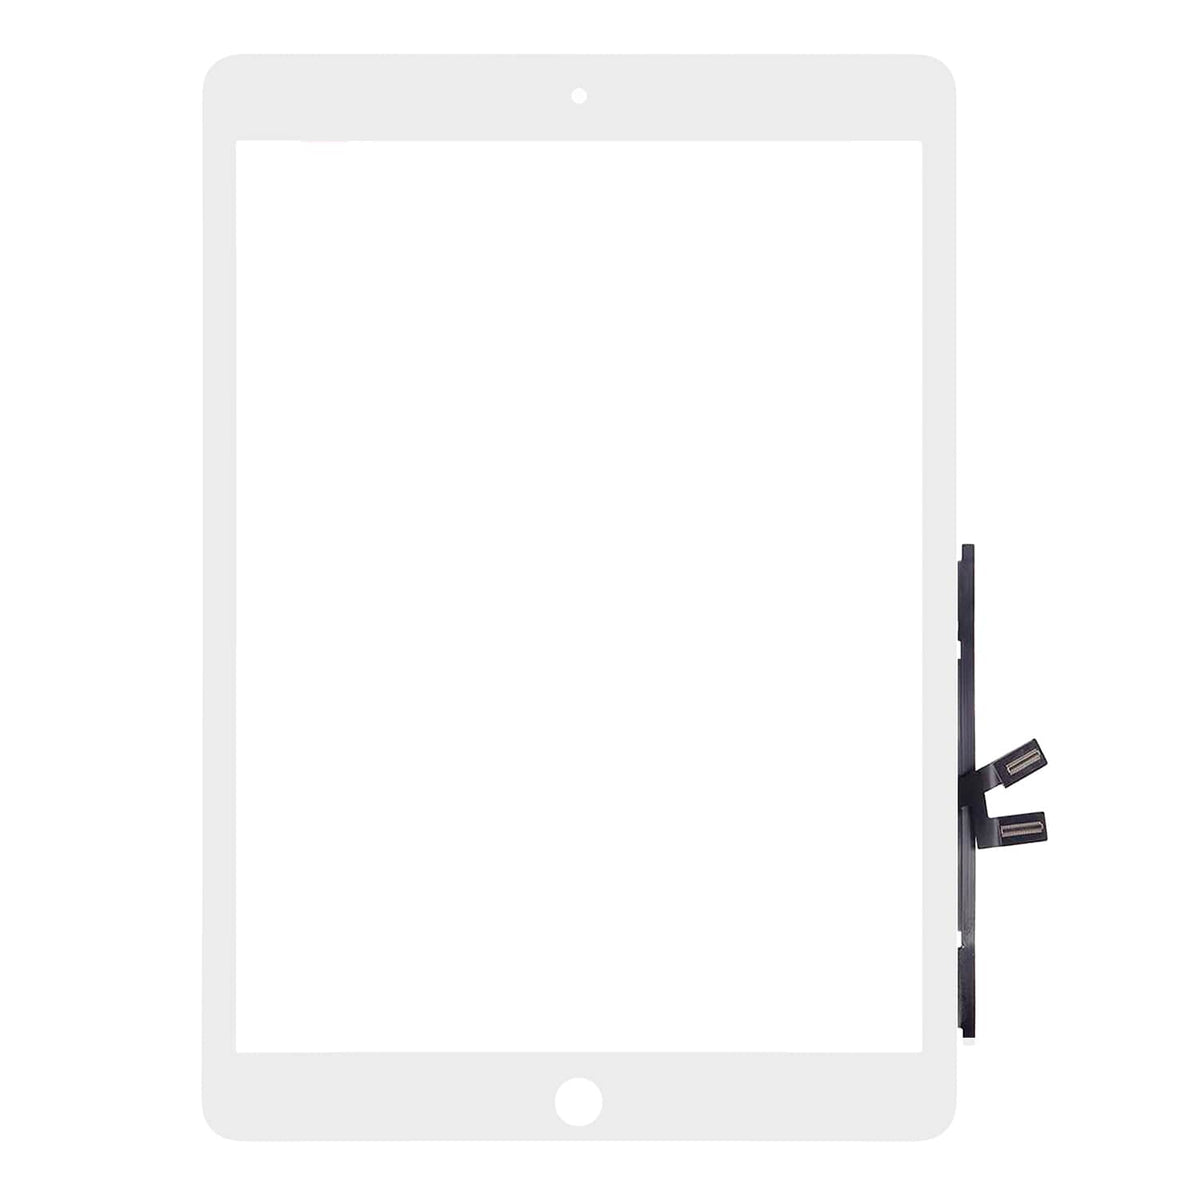 WHITE TOUCH SCREEN DIGITIZER FOR IPAD 10.2" 9TH